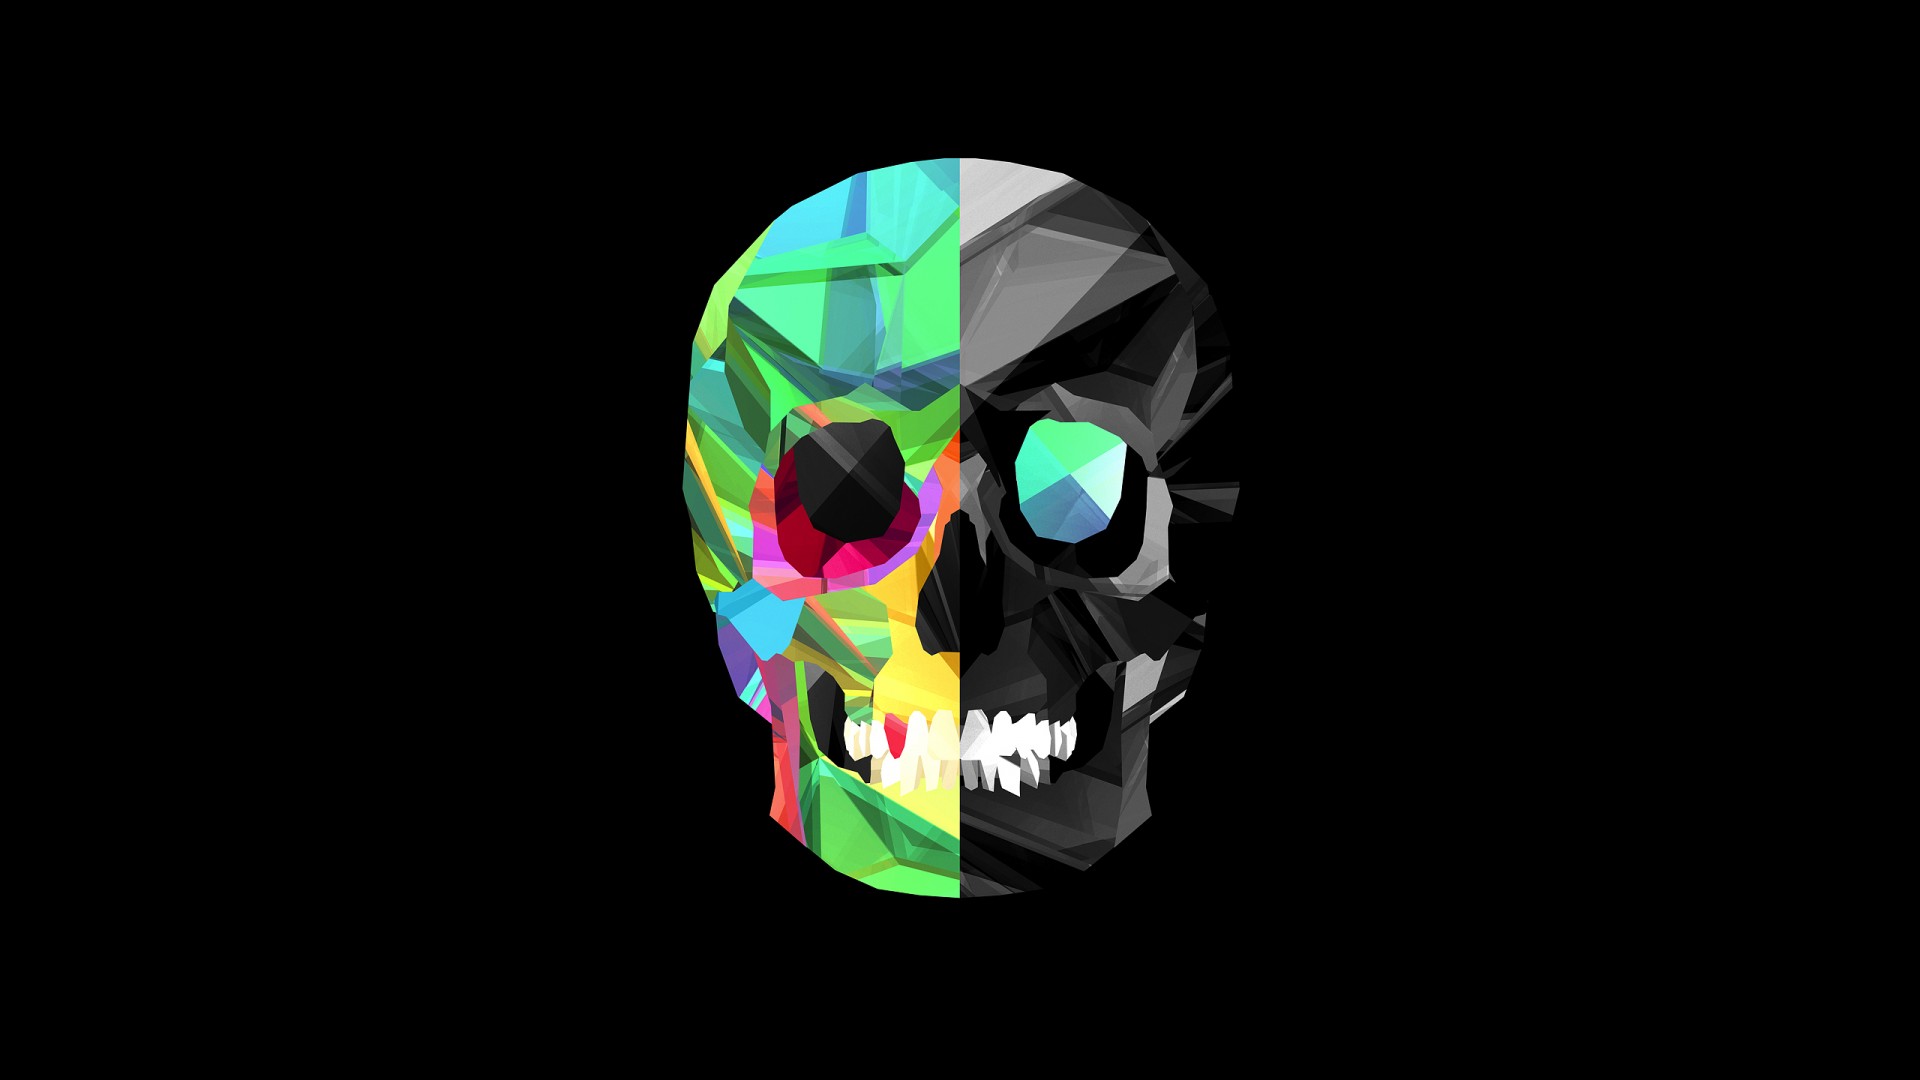 Download Wallpaper For 2048x1152 Resolution Colored Skull